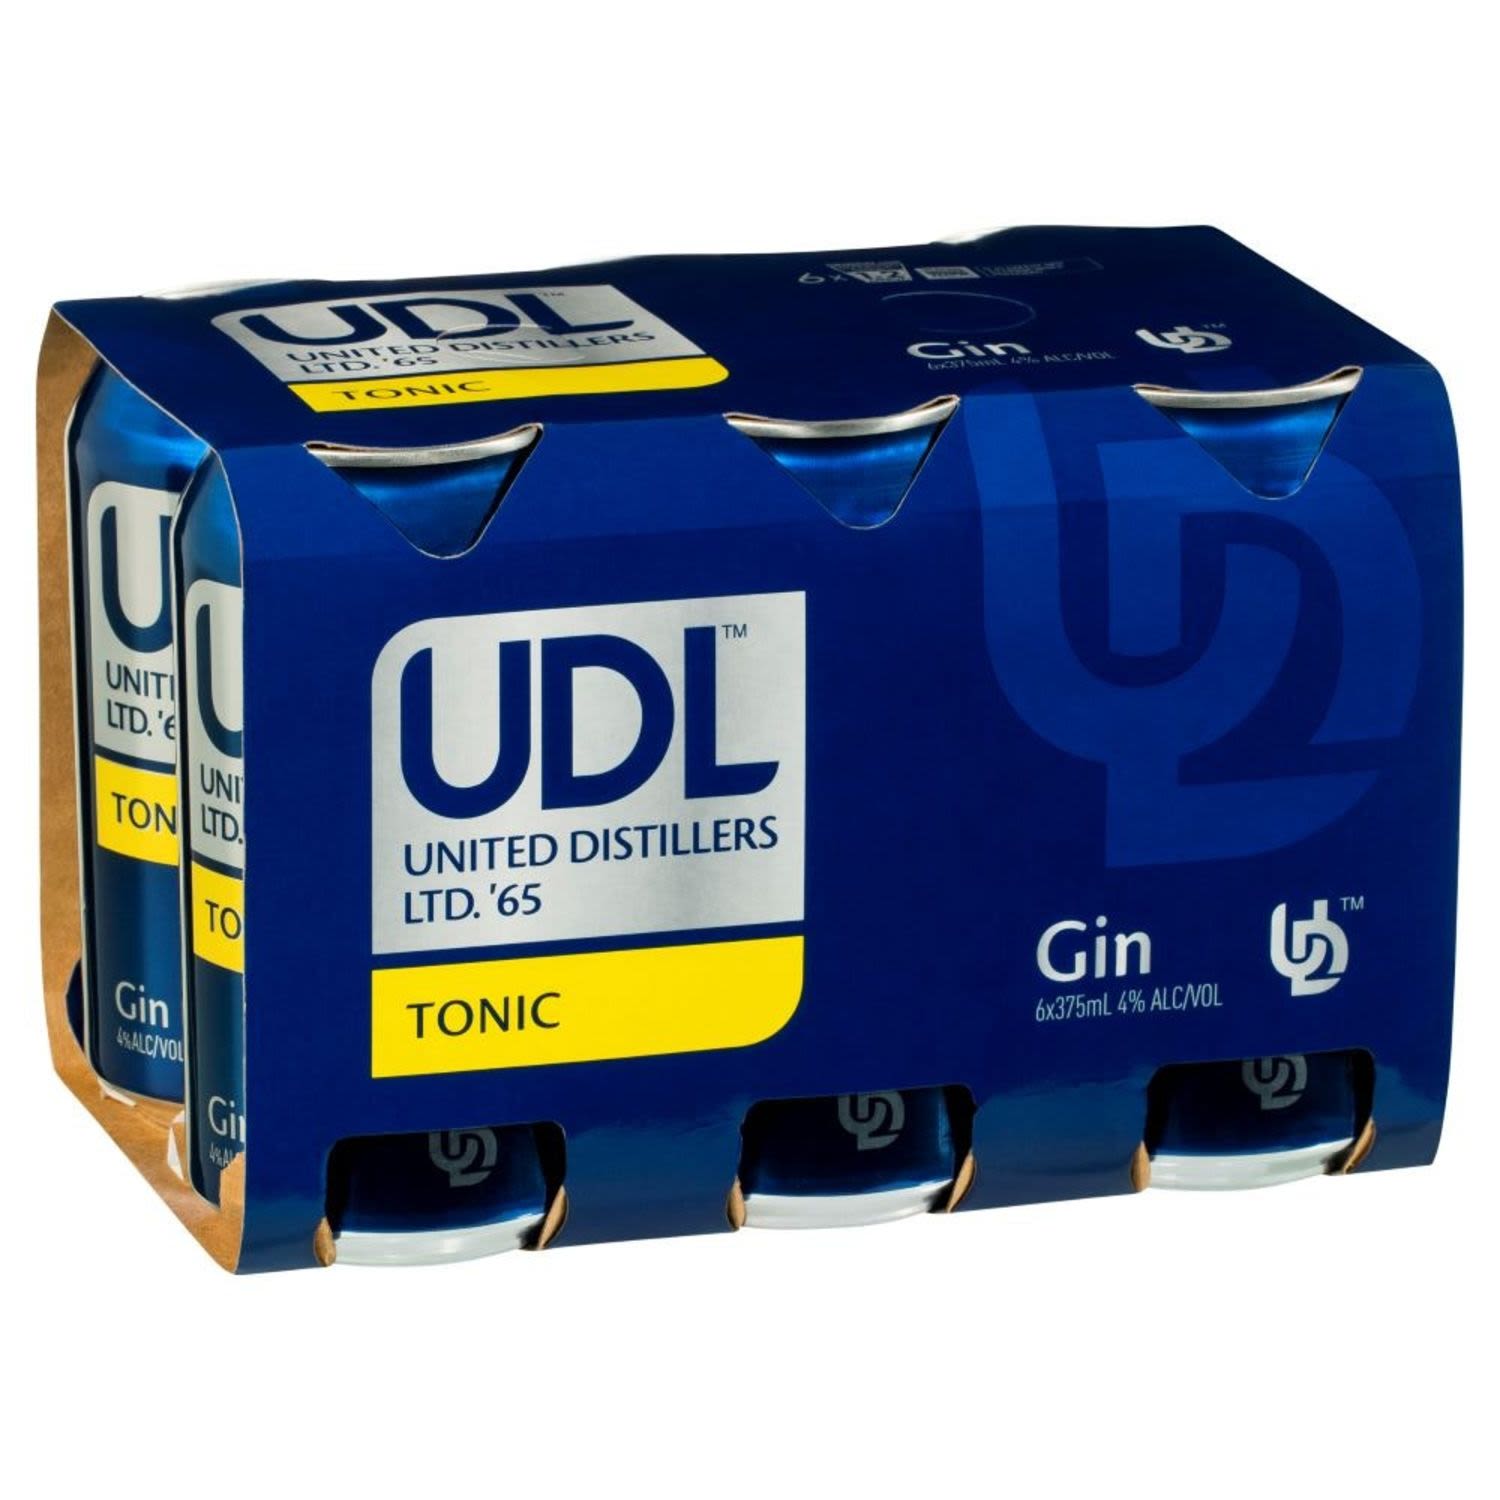 UDL Gin and Tonic Cans 375mL<br /> <br />Alcohol Volume: 4.00%<br /><br />Pack Format: 6 Pack<br /><br />Standard Drinks: 1.2</br /><br />Pack Type: Can<br />